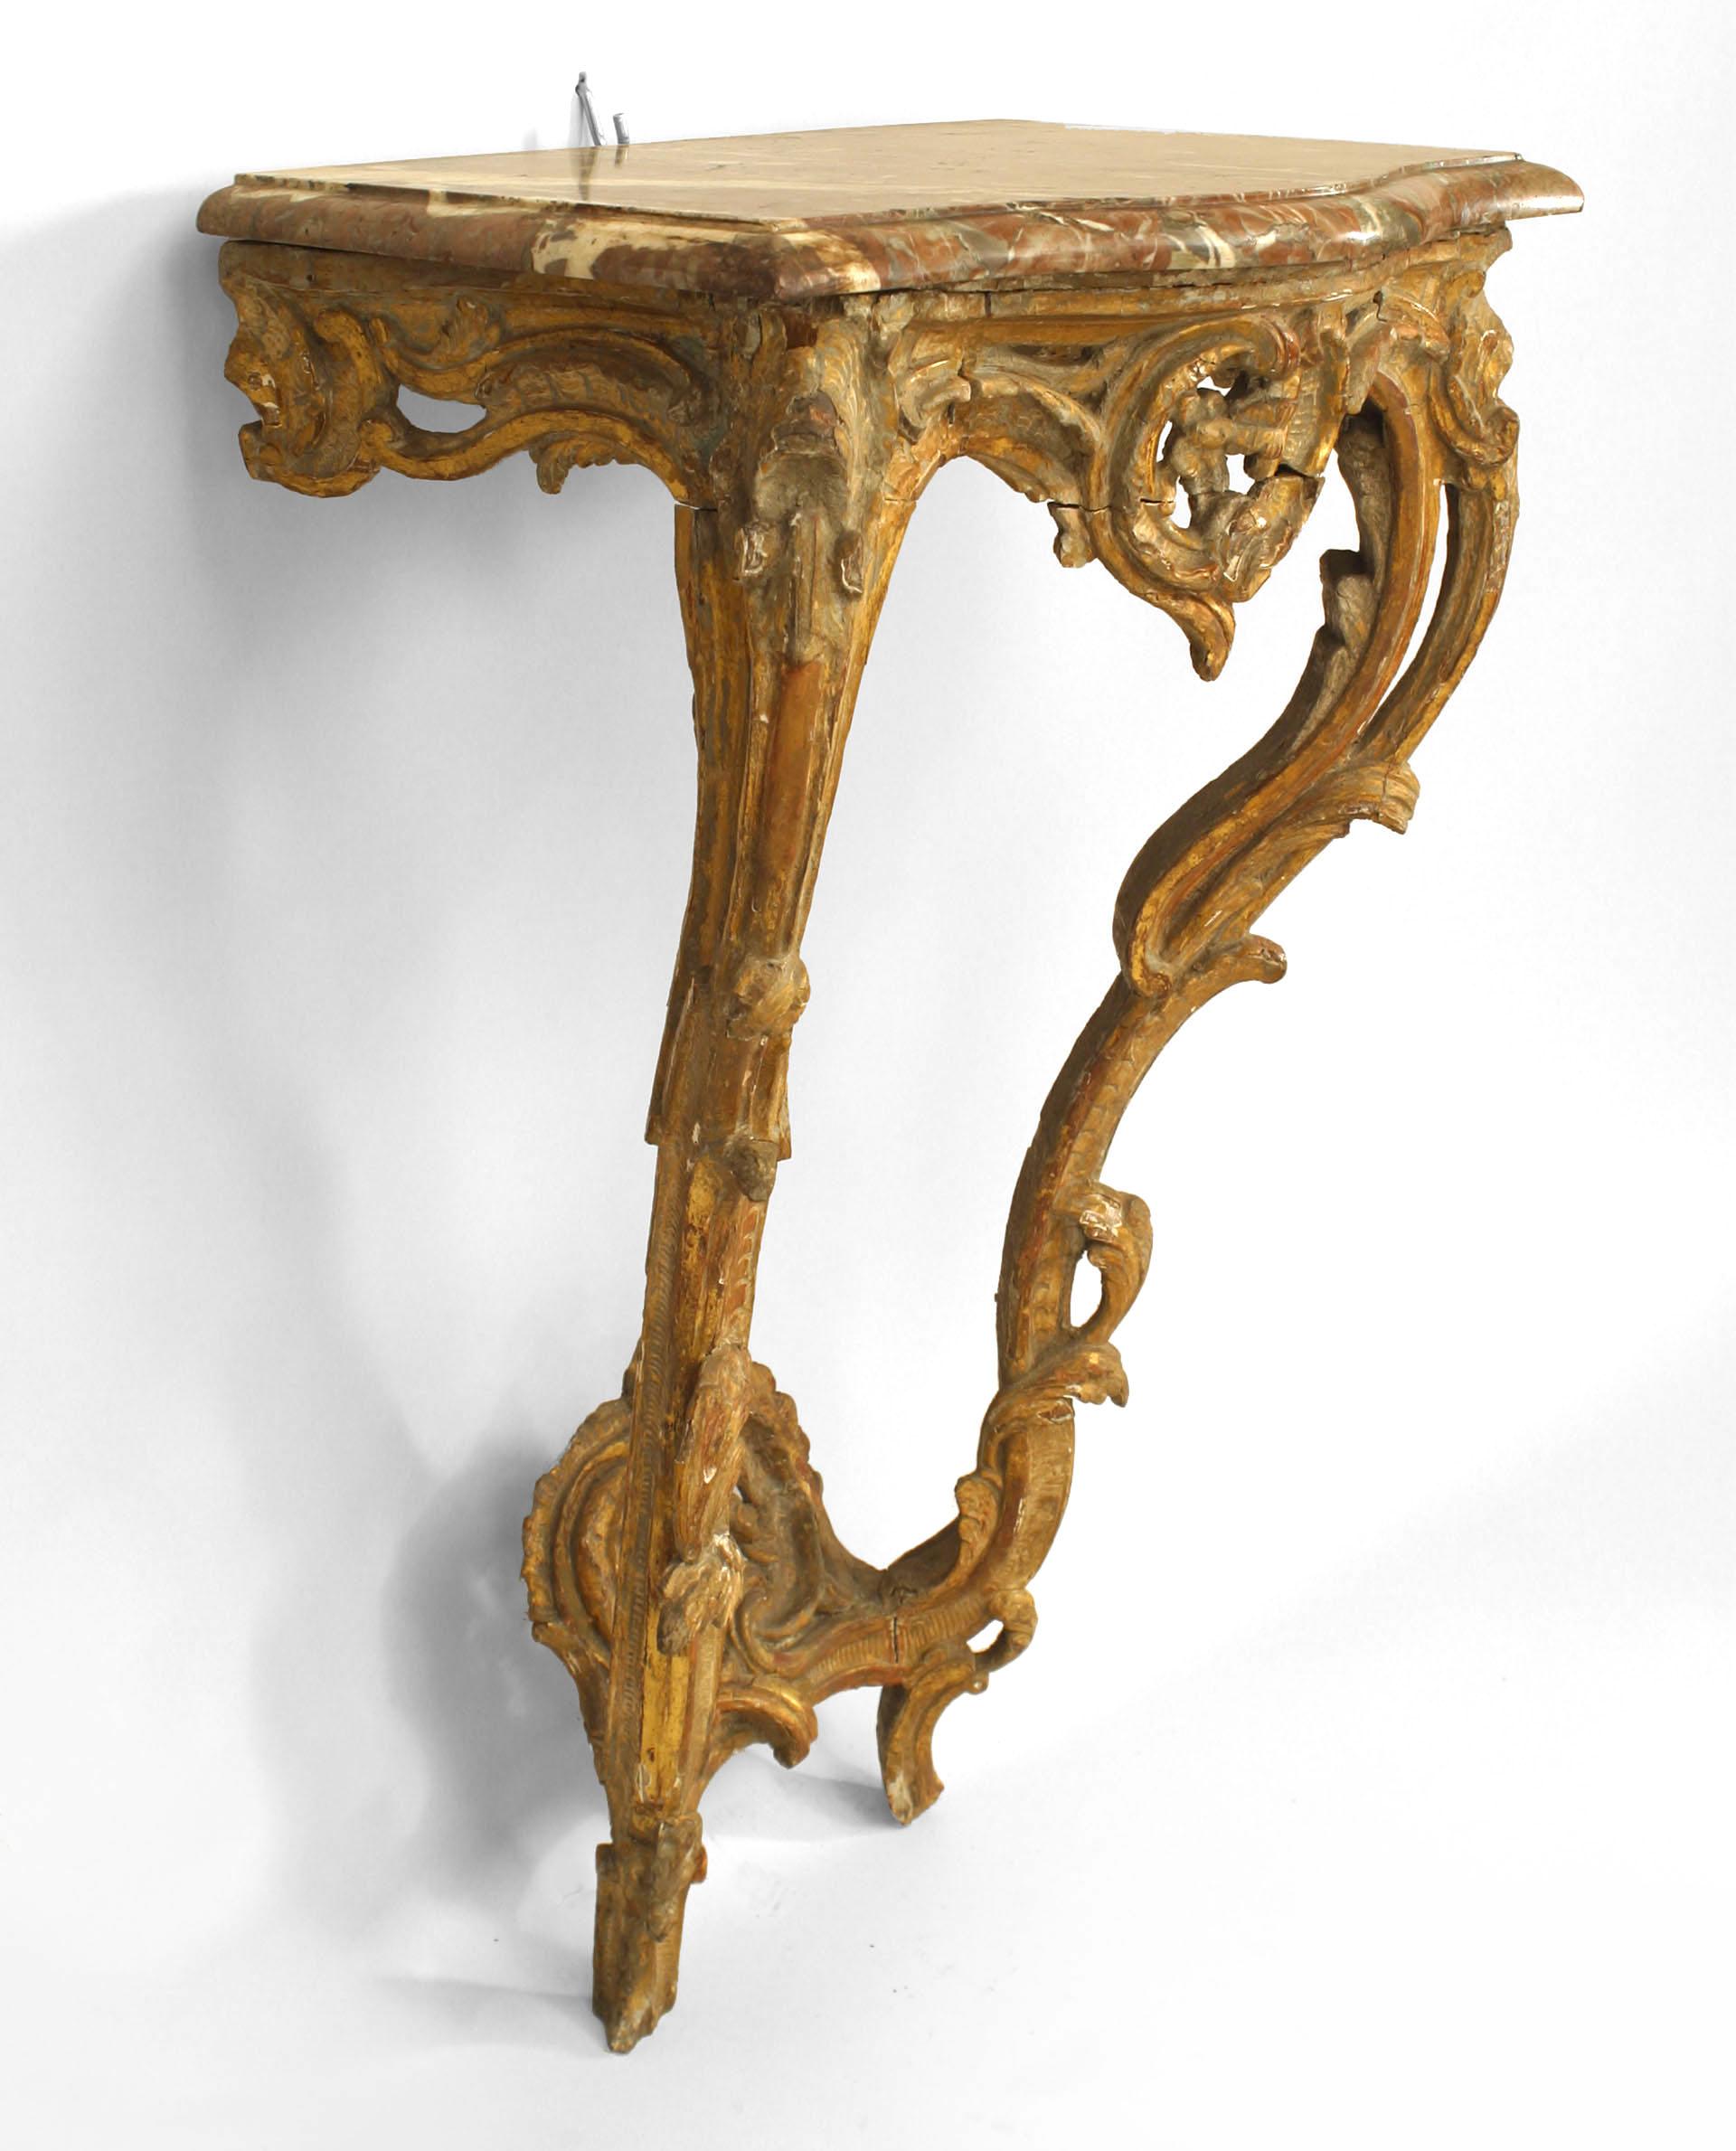 Italian Rococo (18th Century) grey painted bracket console table with gilt trim and open carving with floral design and brown marble top
